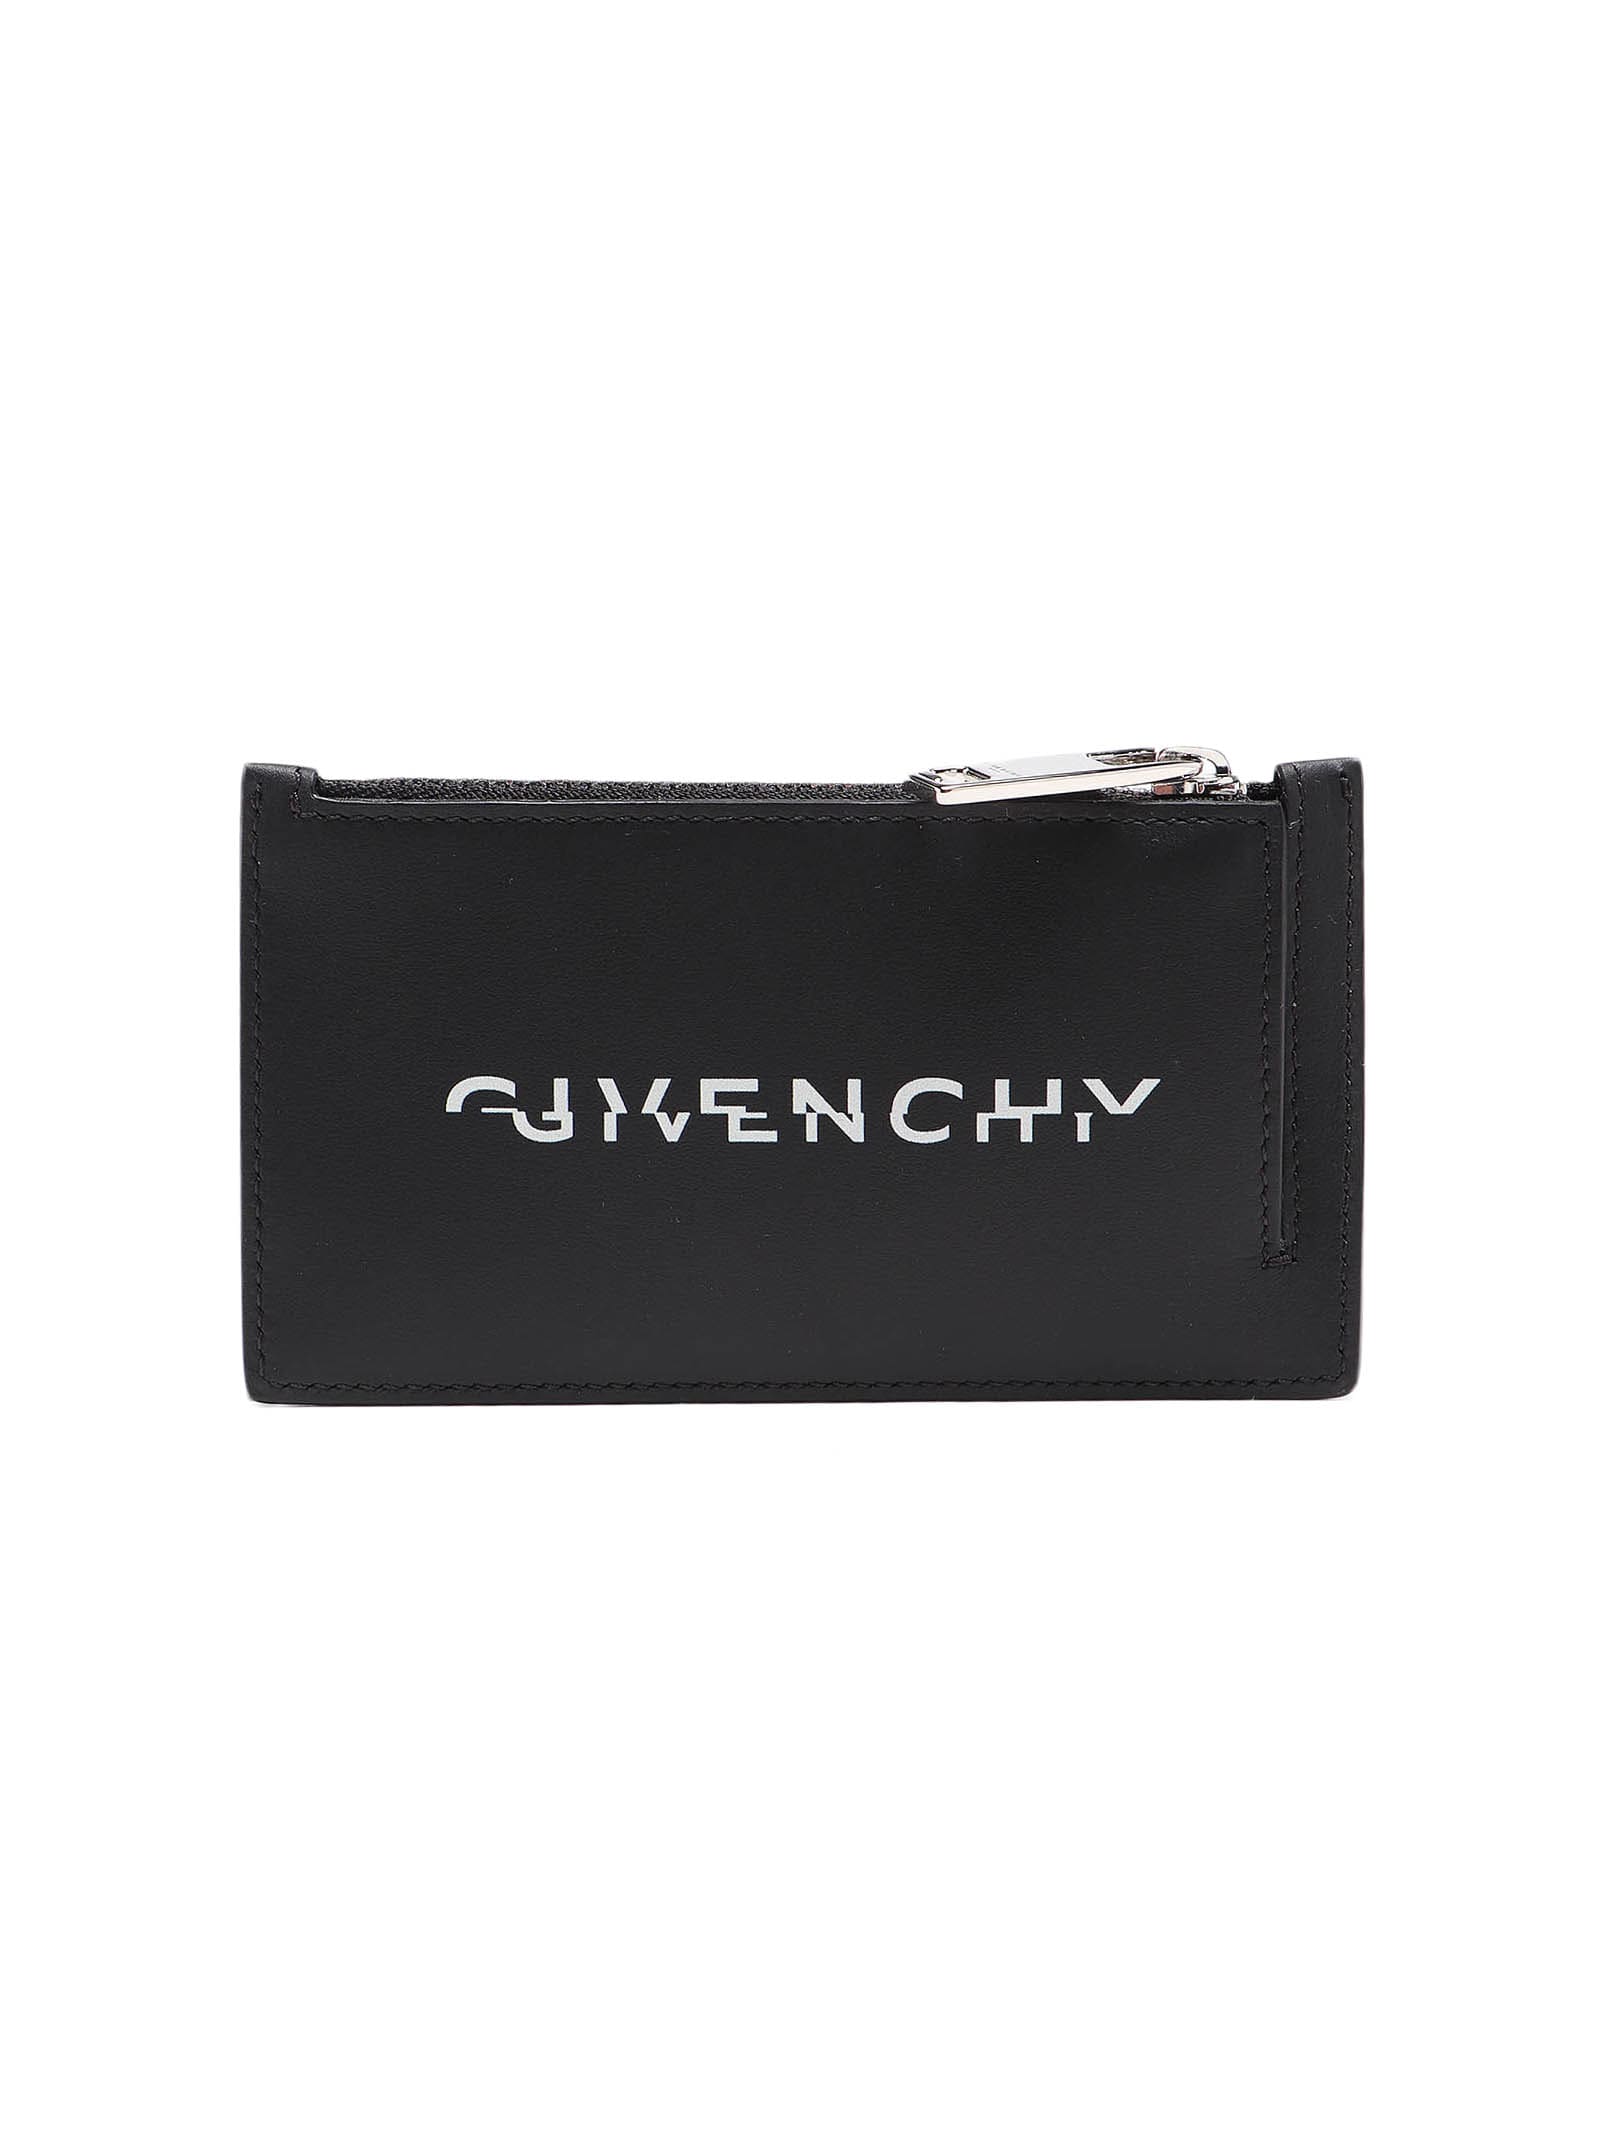 Givenchy Zipped Card Holder In Black/white